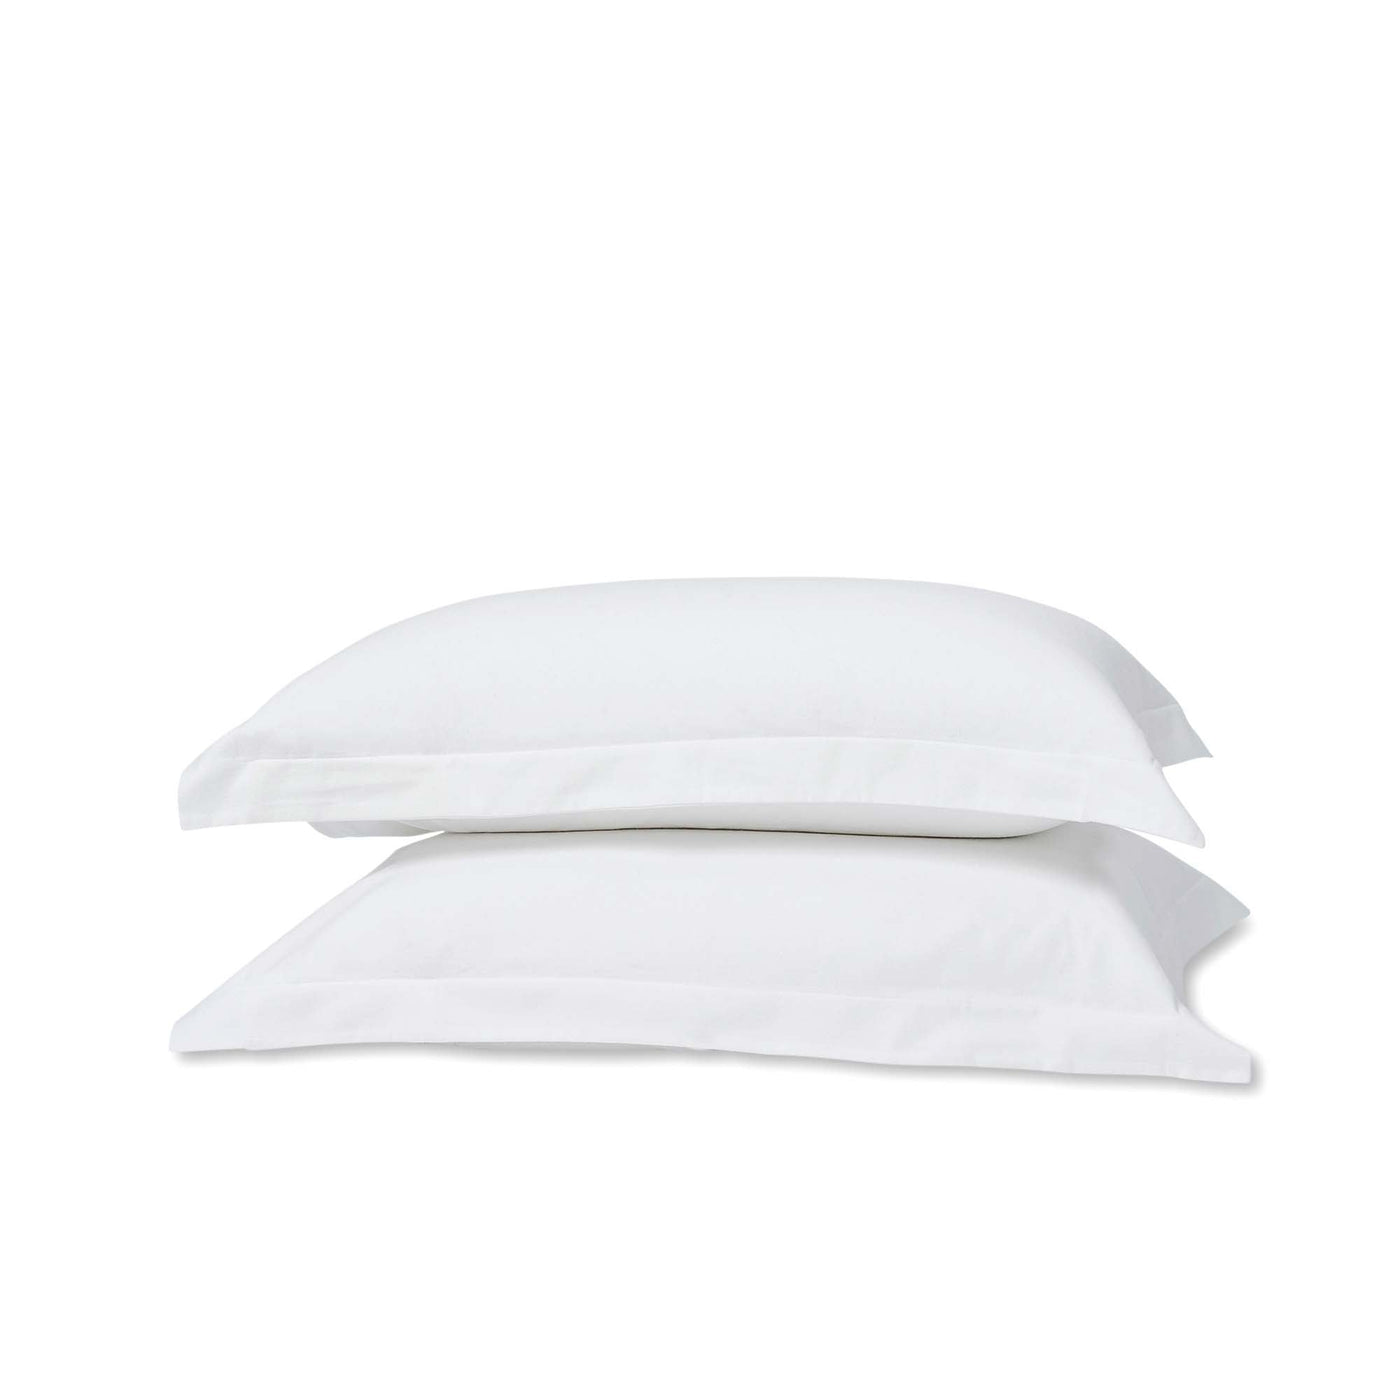 Biarritz 320TC Egyptian Cotton Percale Extra Deep Fitted Sheets Collection